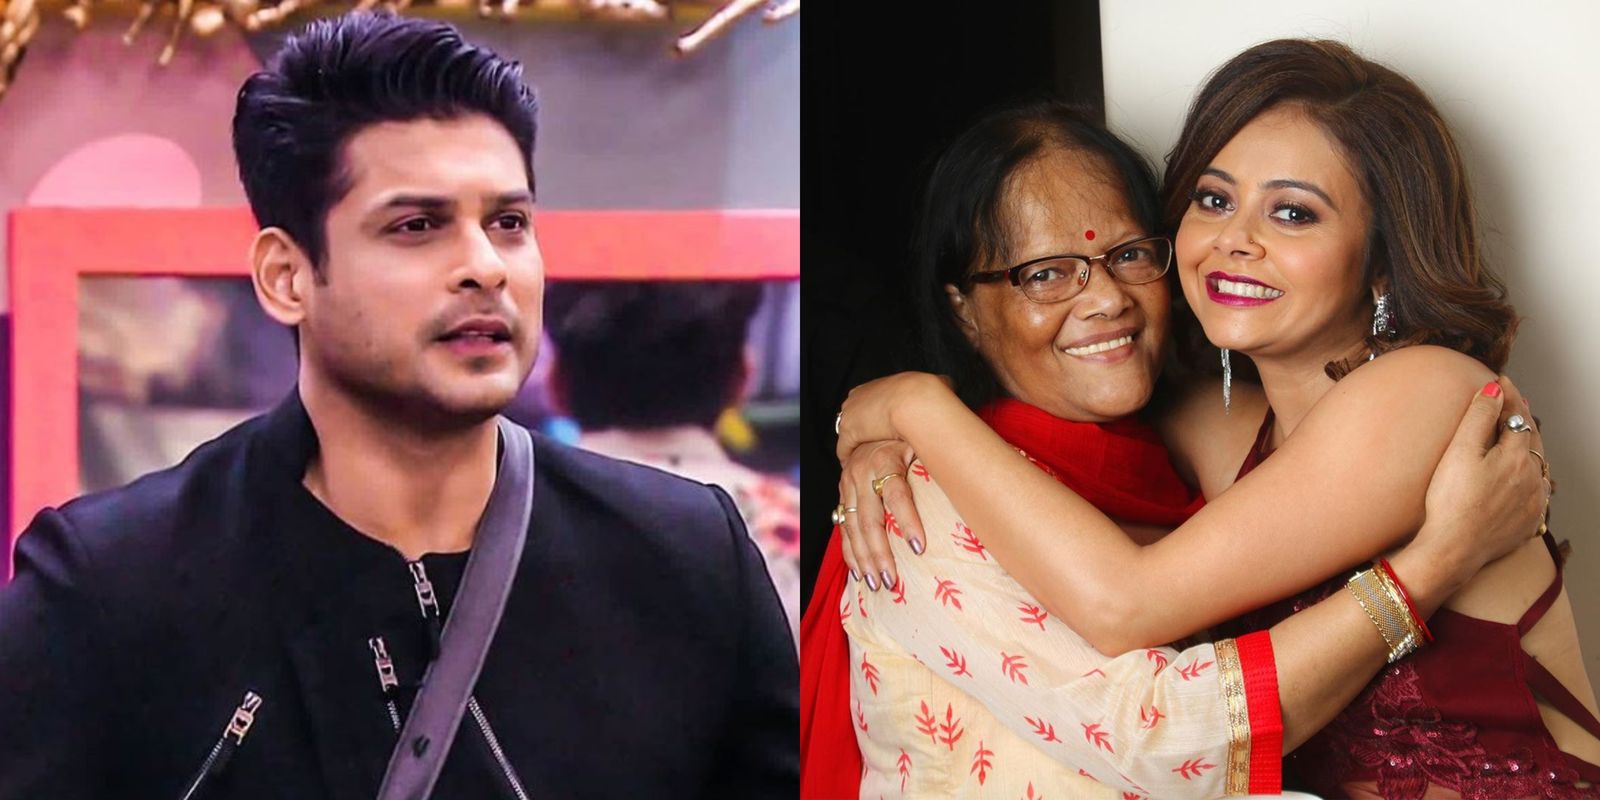 Bigg Boss 13: Devoleena Bhattacharjee's Mother Apologises To Siddharth Shukla For Her Daughter Calling Him A 'Psycho' 